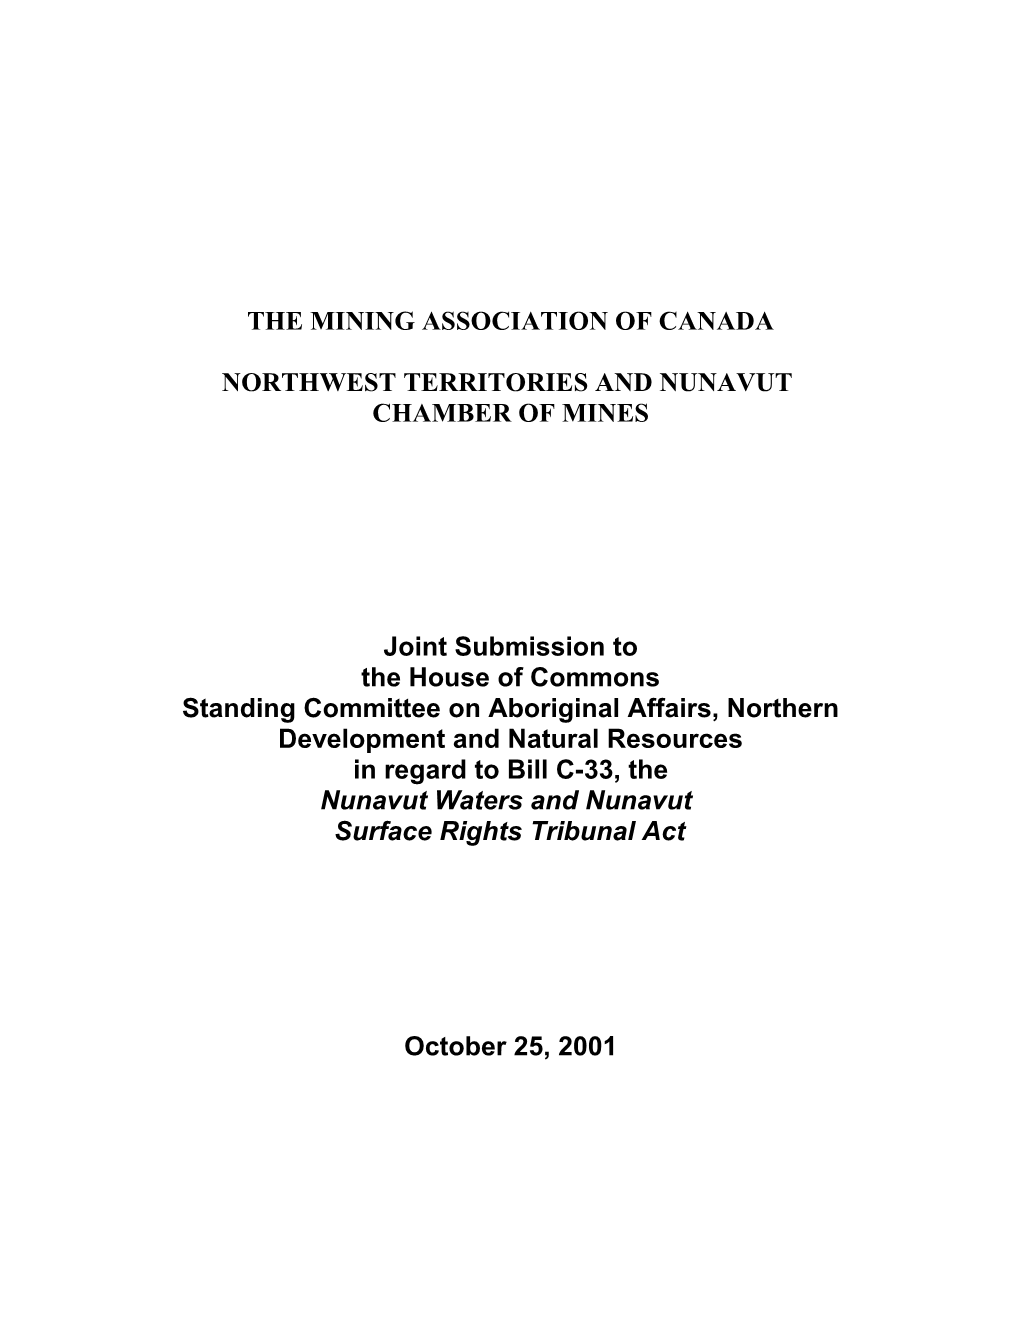 The Mining Association of Canada